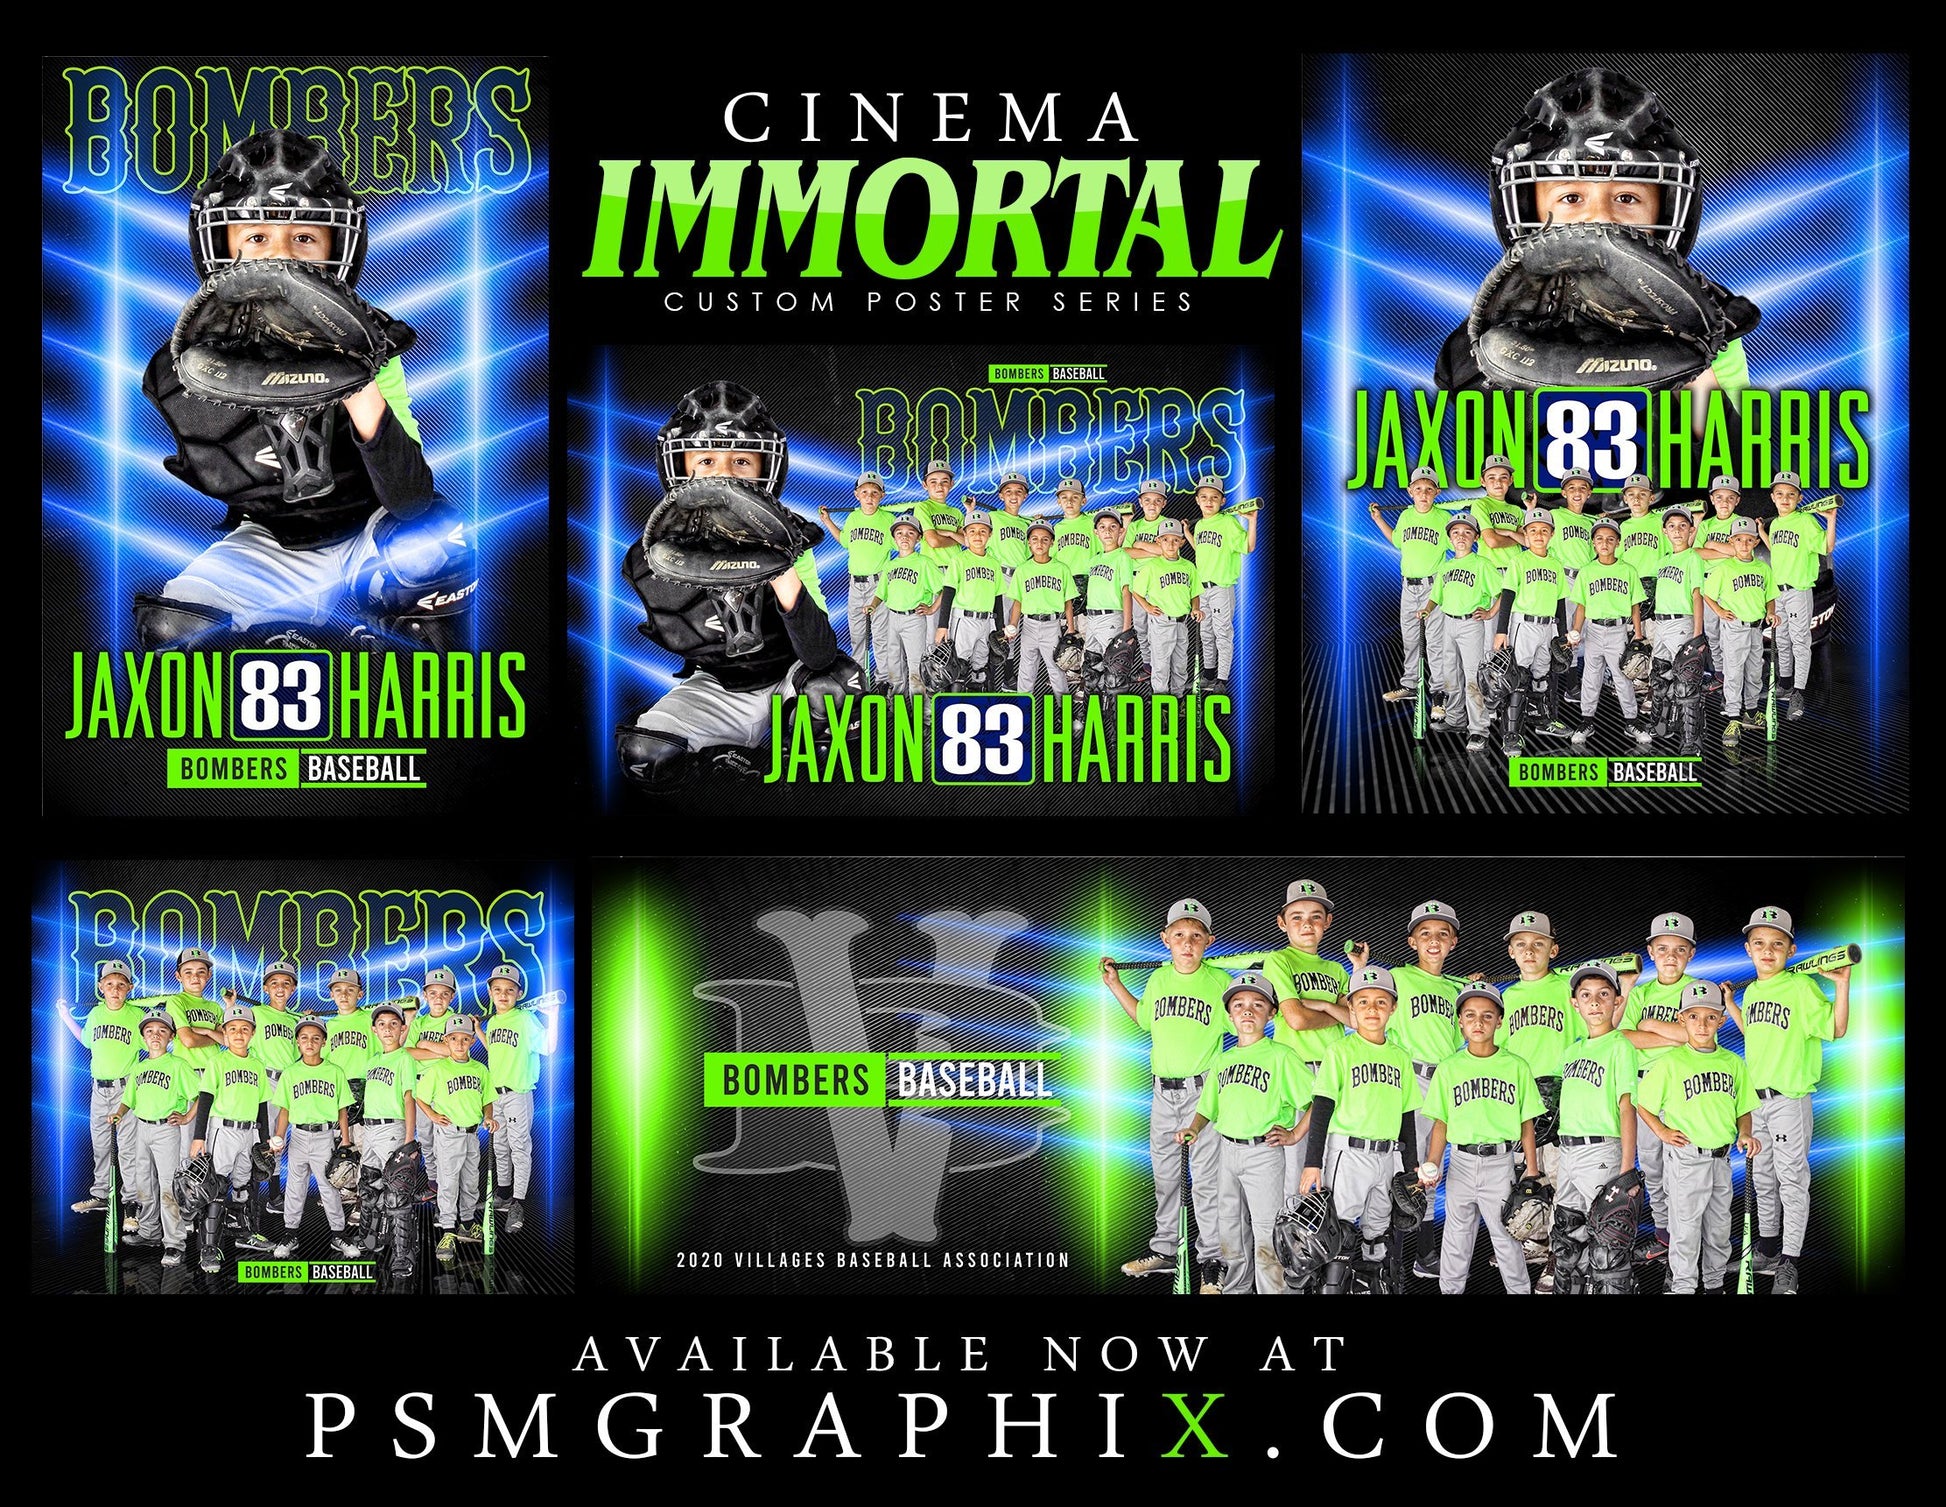 Immortal - Cinema Series - Full Collection-Photoshop Template - PSMGraphix